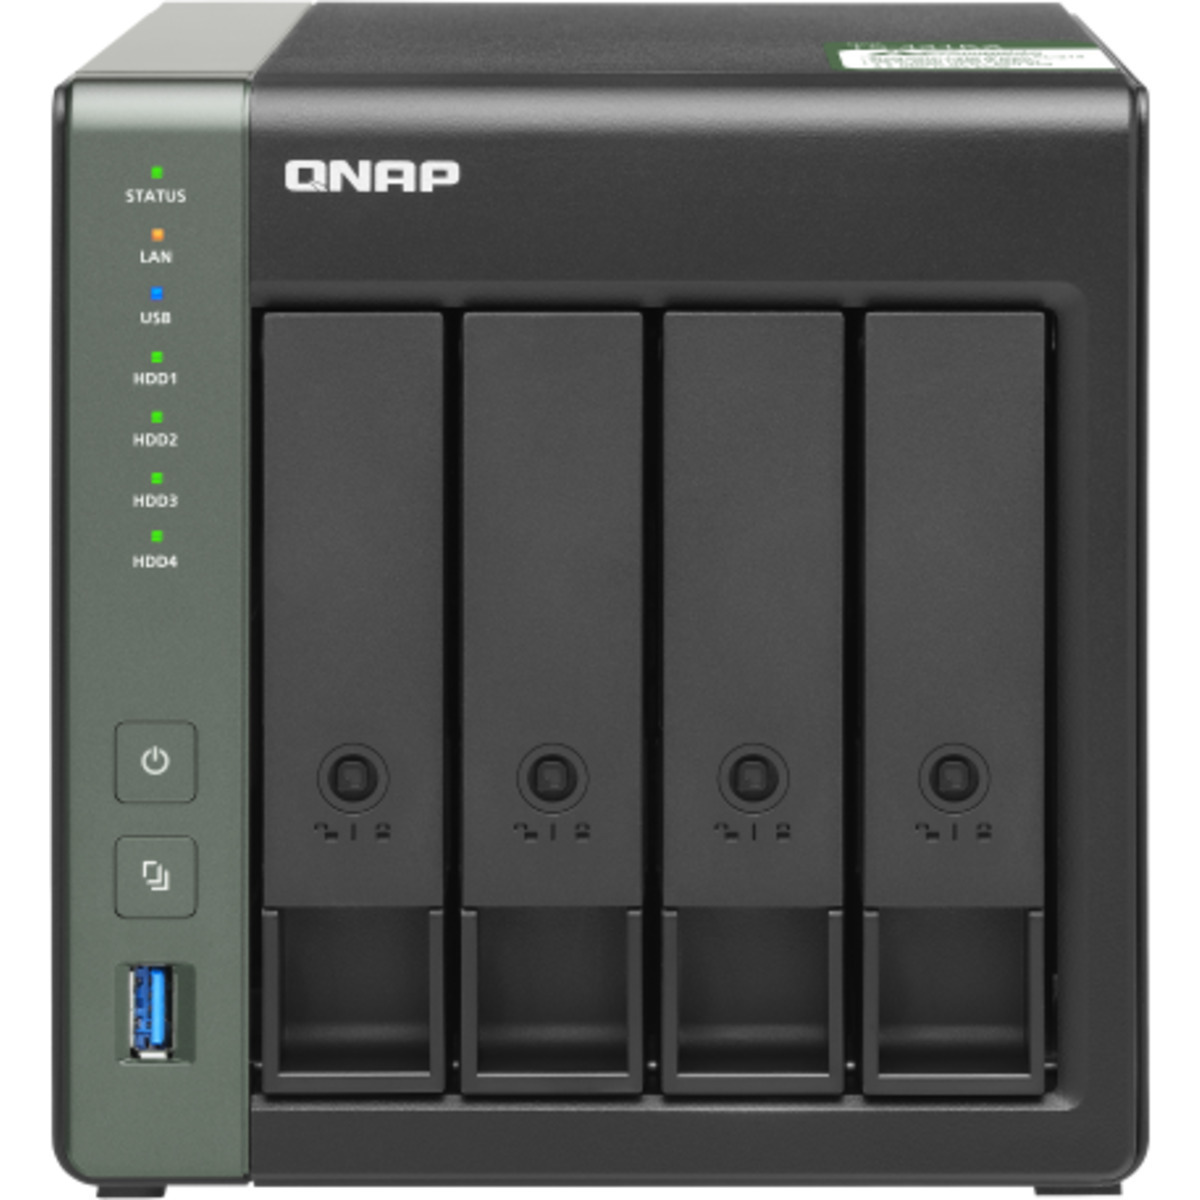 buy QNAP TS-431KX 32tb Desktop NAS - Network Attached Storage Device 4x8000gb Seagate IronWolf Pro ST8000NT001 3.5 7200rpm SATA 6Gb/s HDD NAS Class Drives Installed - Burn-In Tested - ON SALE - FREE RAM UPGRADE - nas headquarters buy network attached storage server device das new raid-5 free shipping usa spring sale TS-431KX